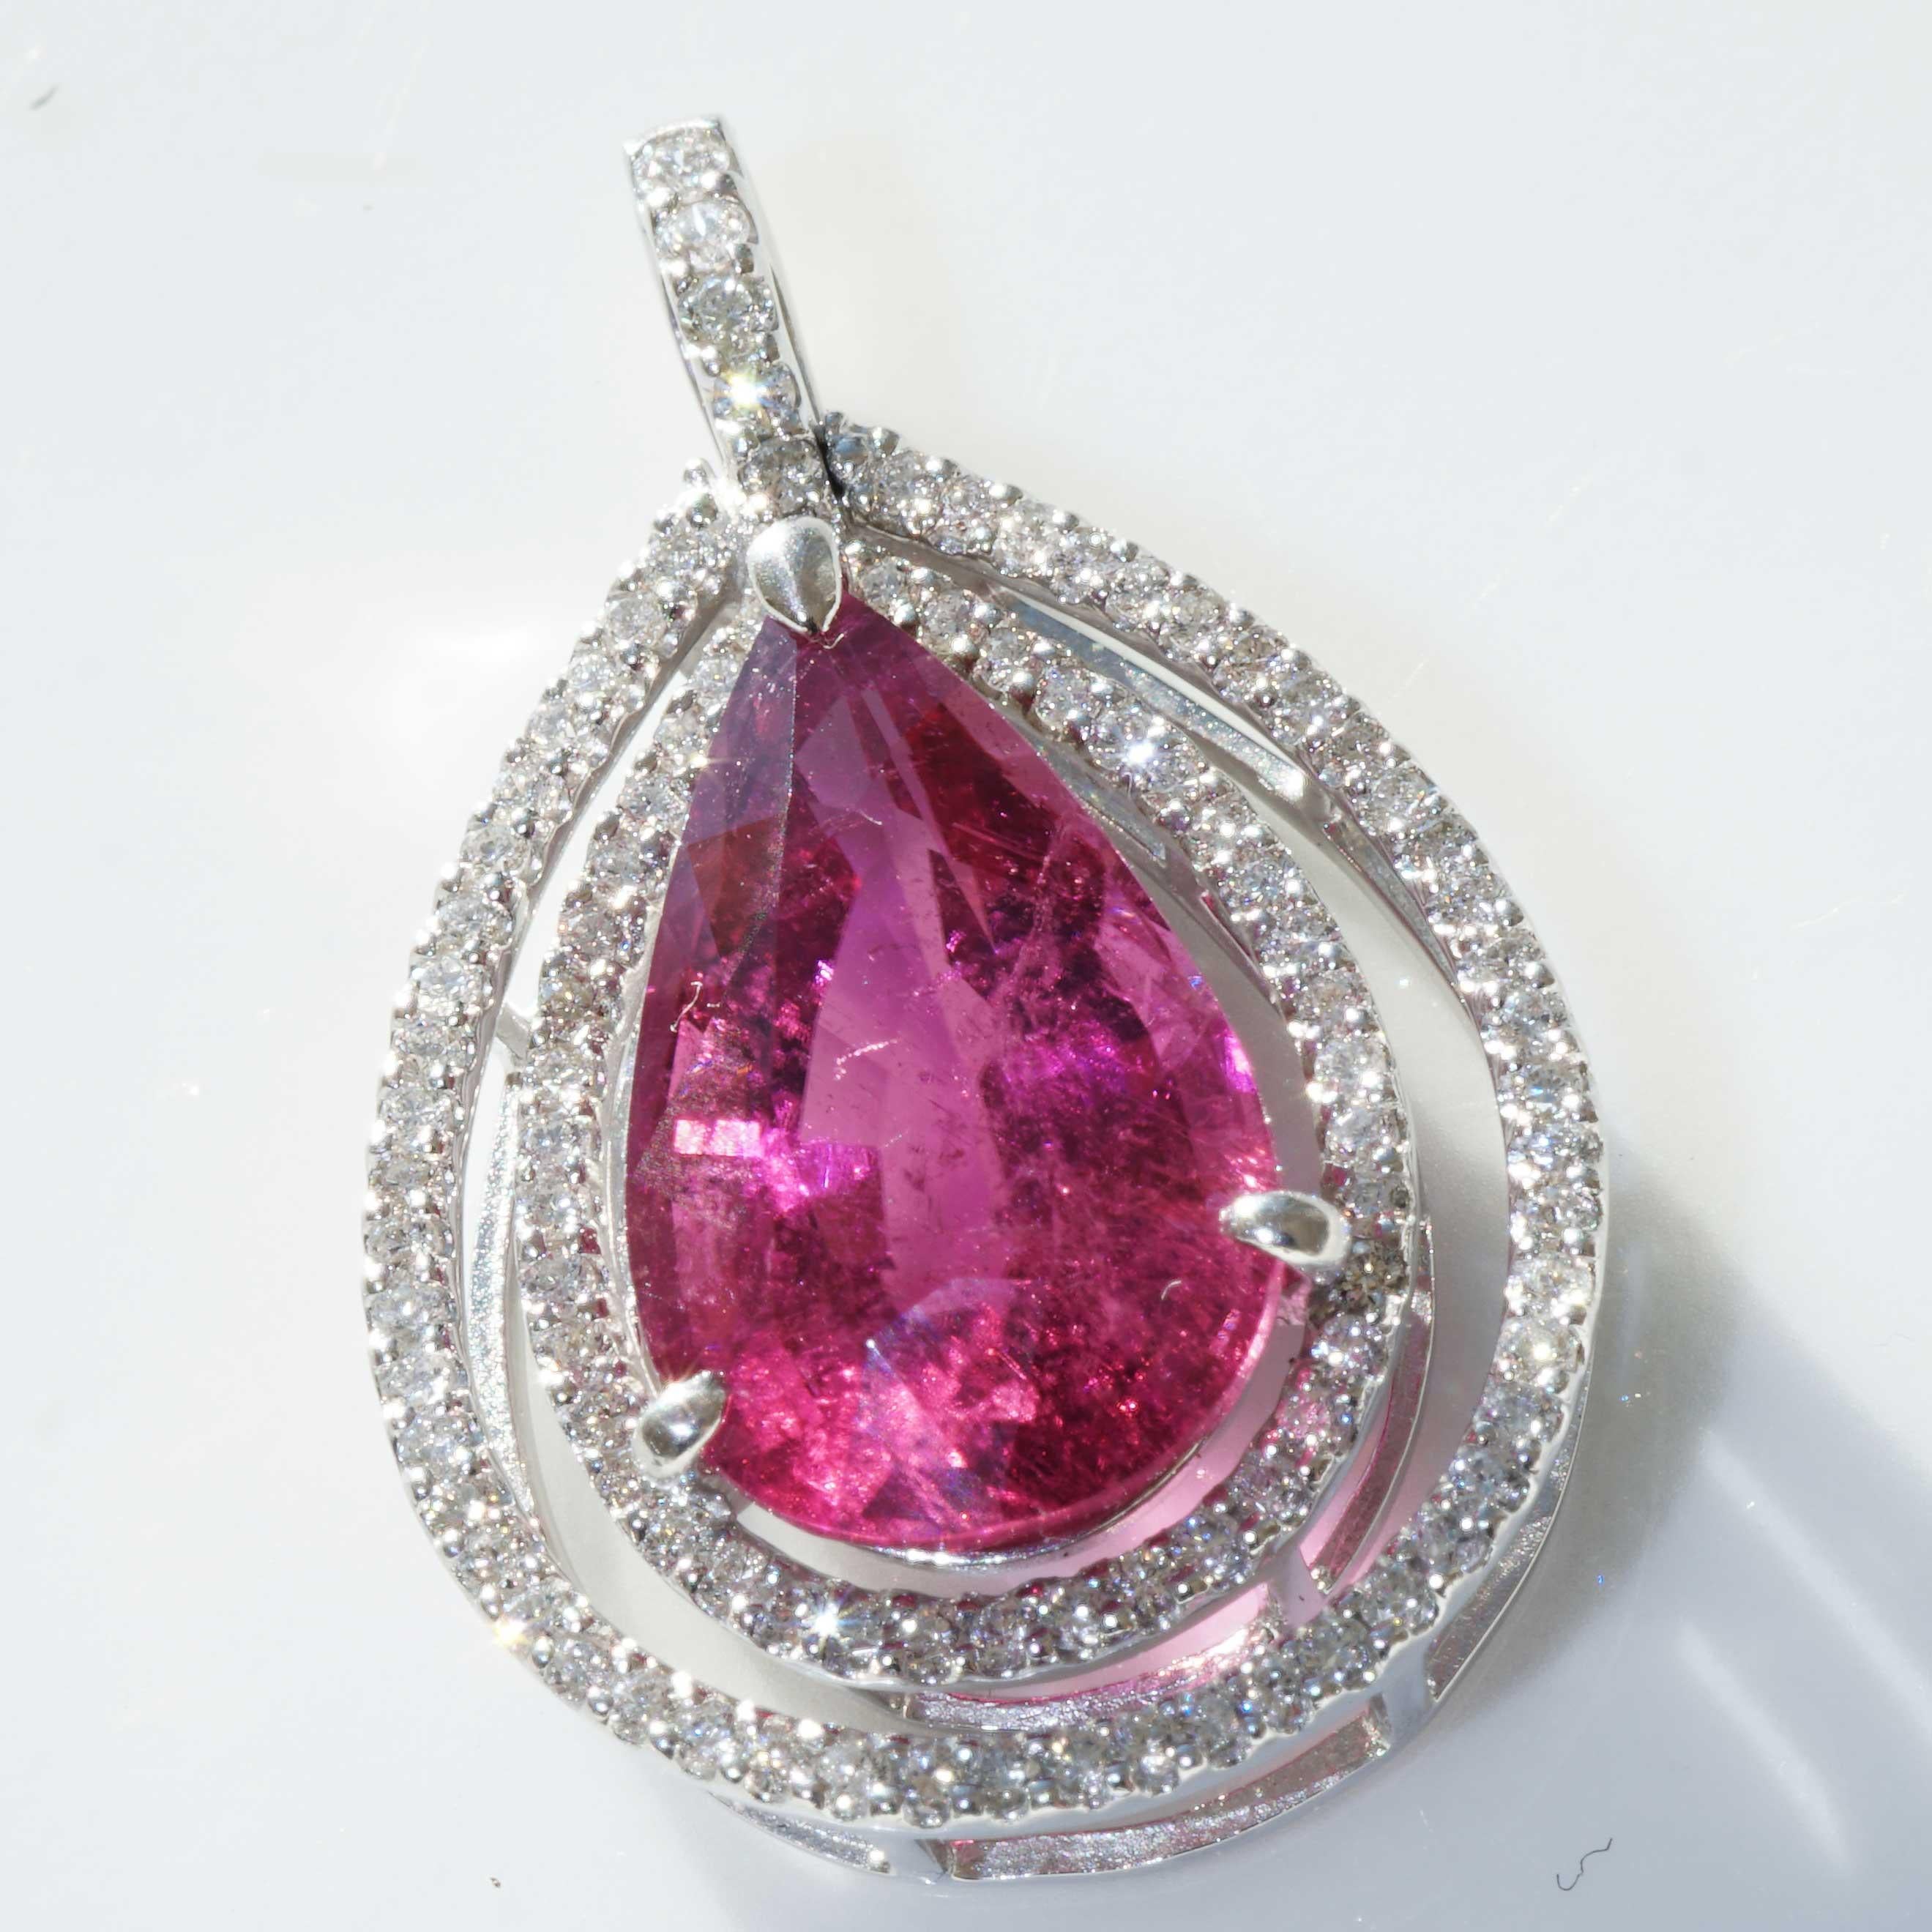 Pendant with rare rubelite (tourmaline) of 7.58 ct, hot pink in bright color quality, with a few natural. Liquid inclusions, double row in halo style surrounded by full-cut brilliant-cut diamonds totaling approx. 0.61 ct TW (fine white G) / VS (very